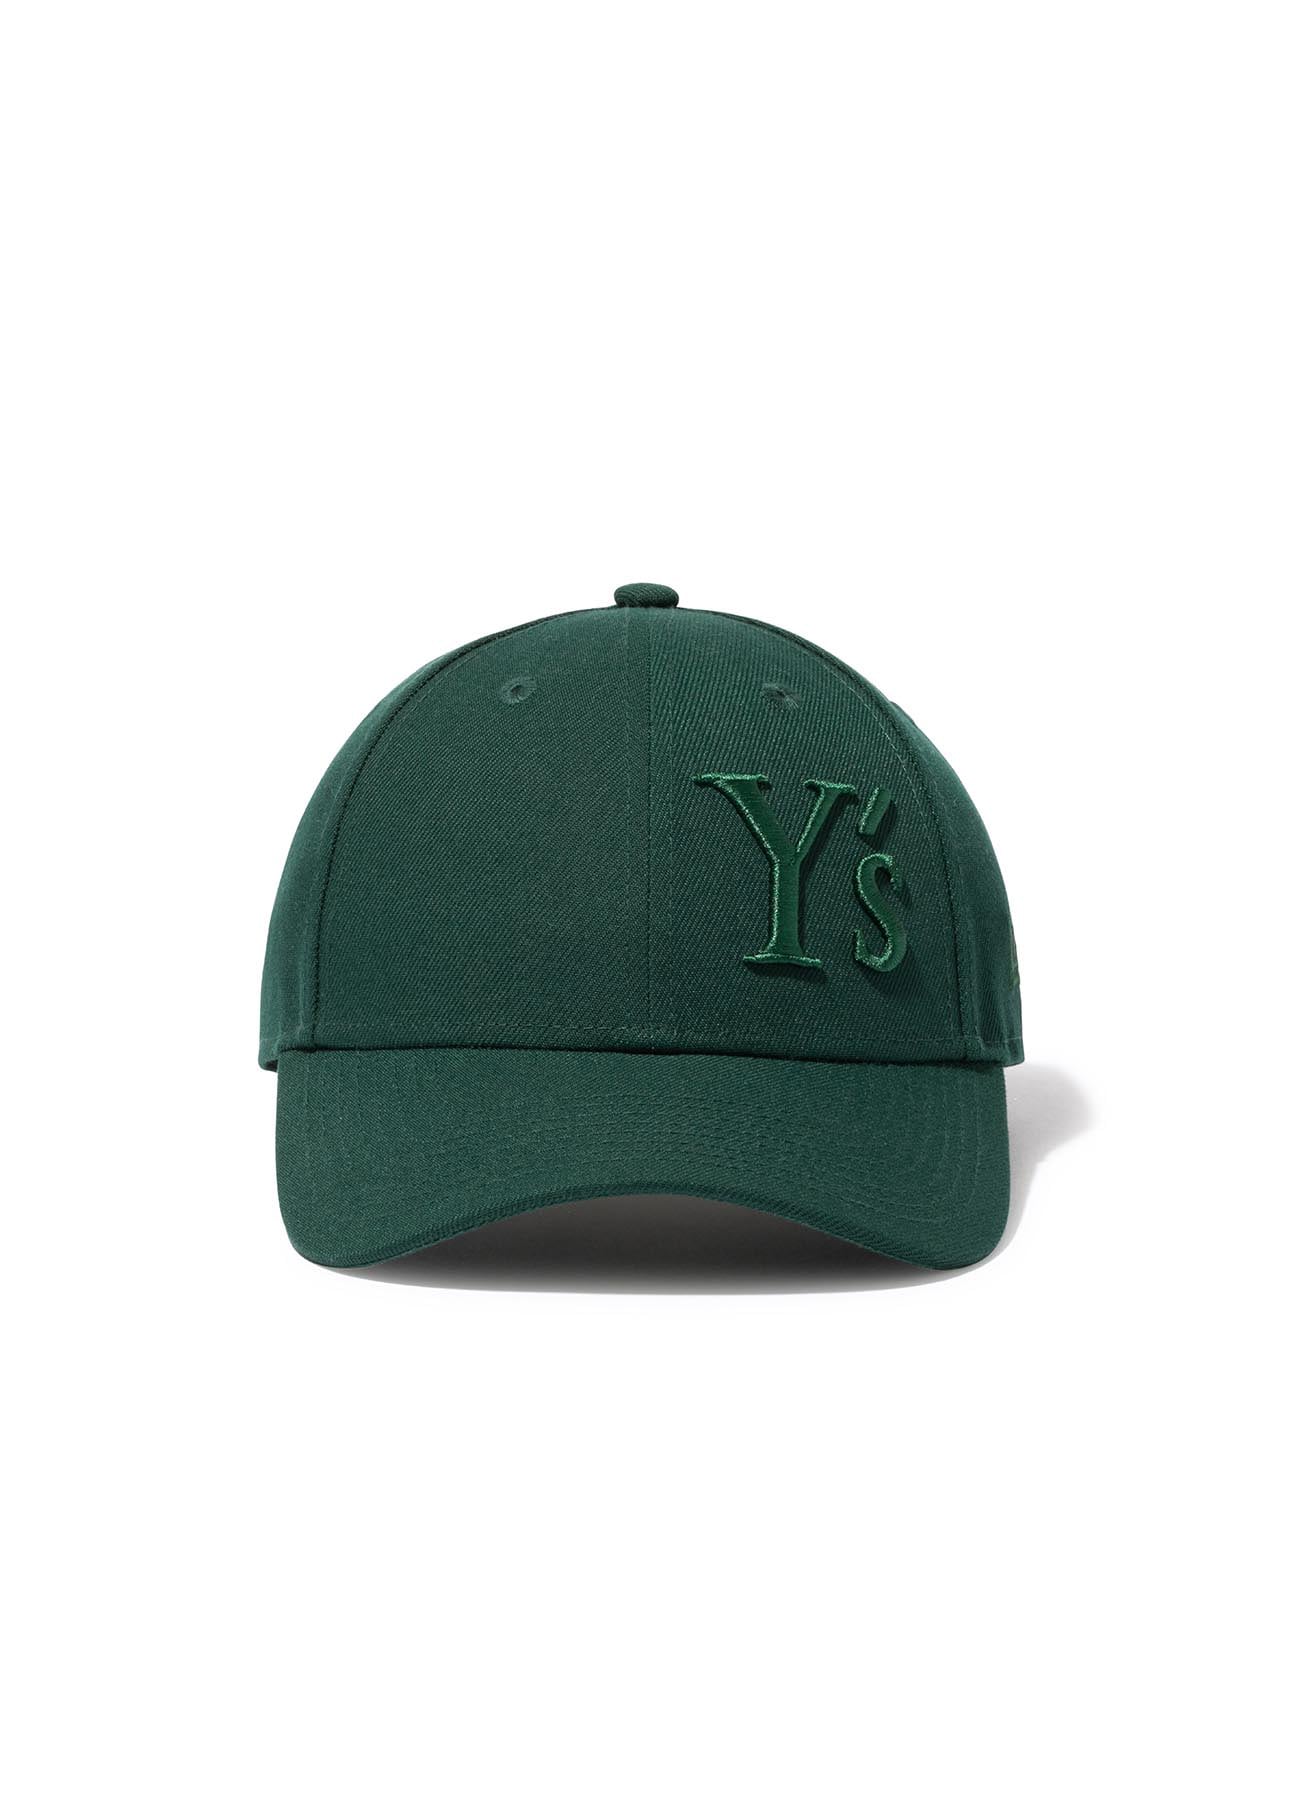 Y's × New Era] 9FORTY Y's LOGO CAP(FREE SIZE Green): Y's｜THE SHOP